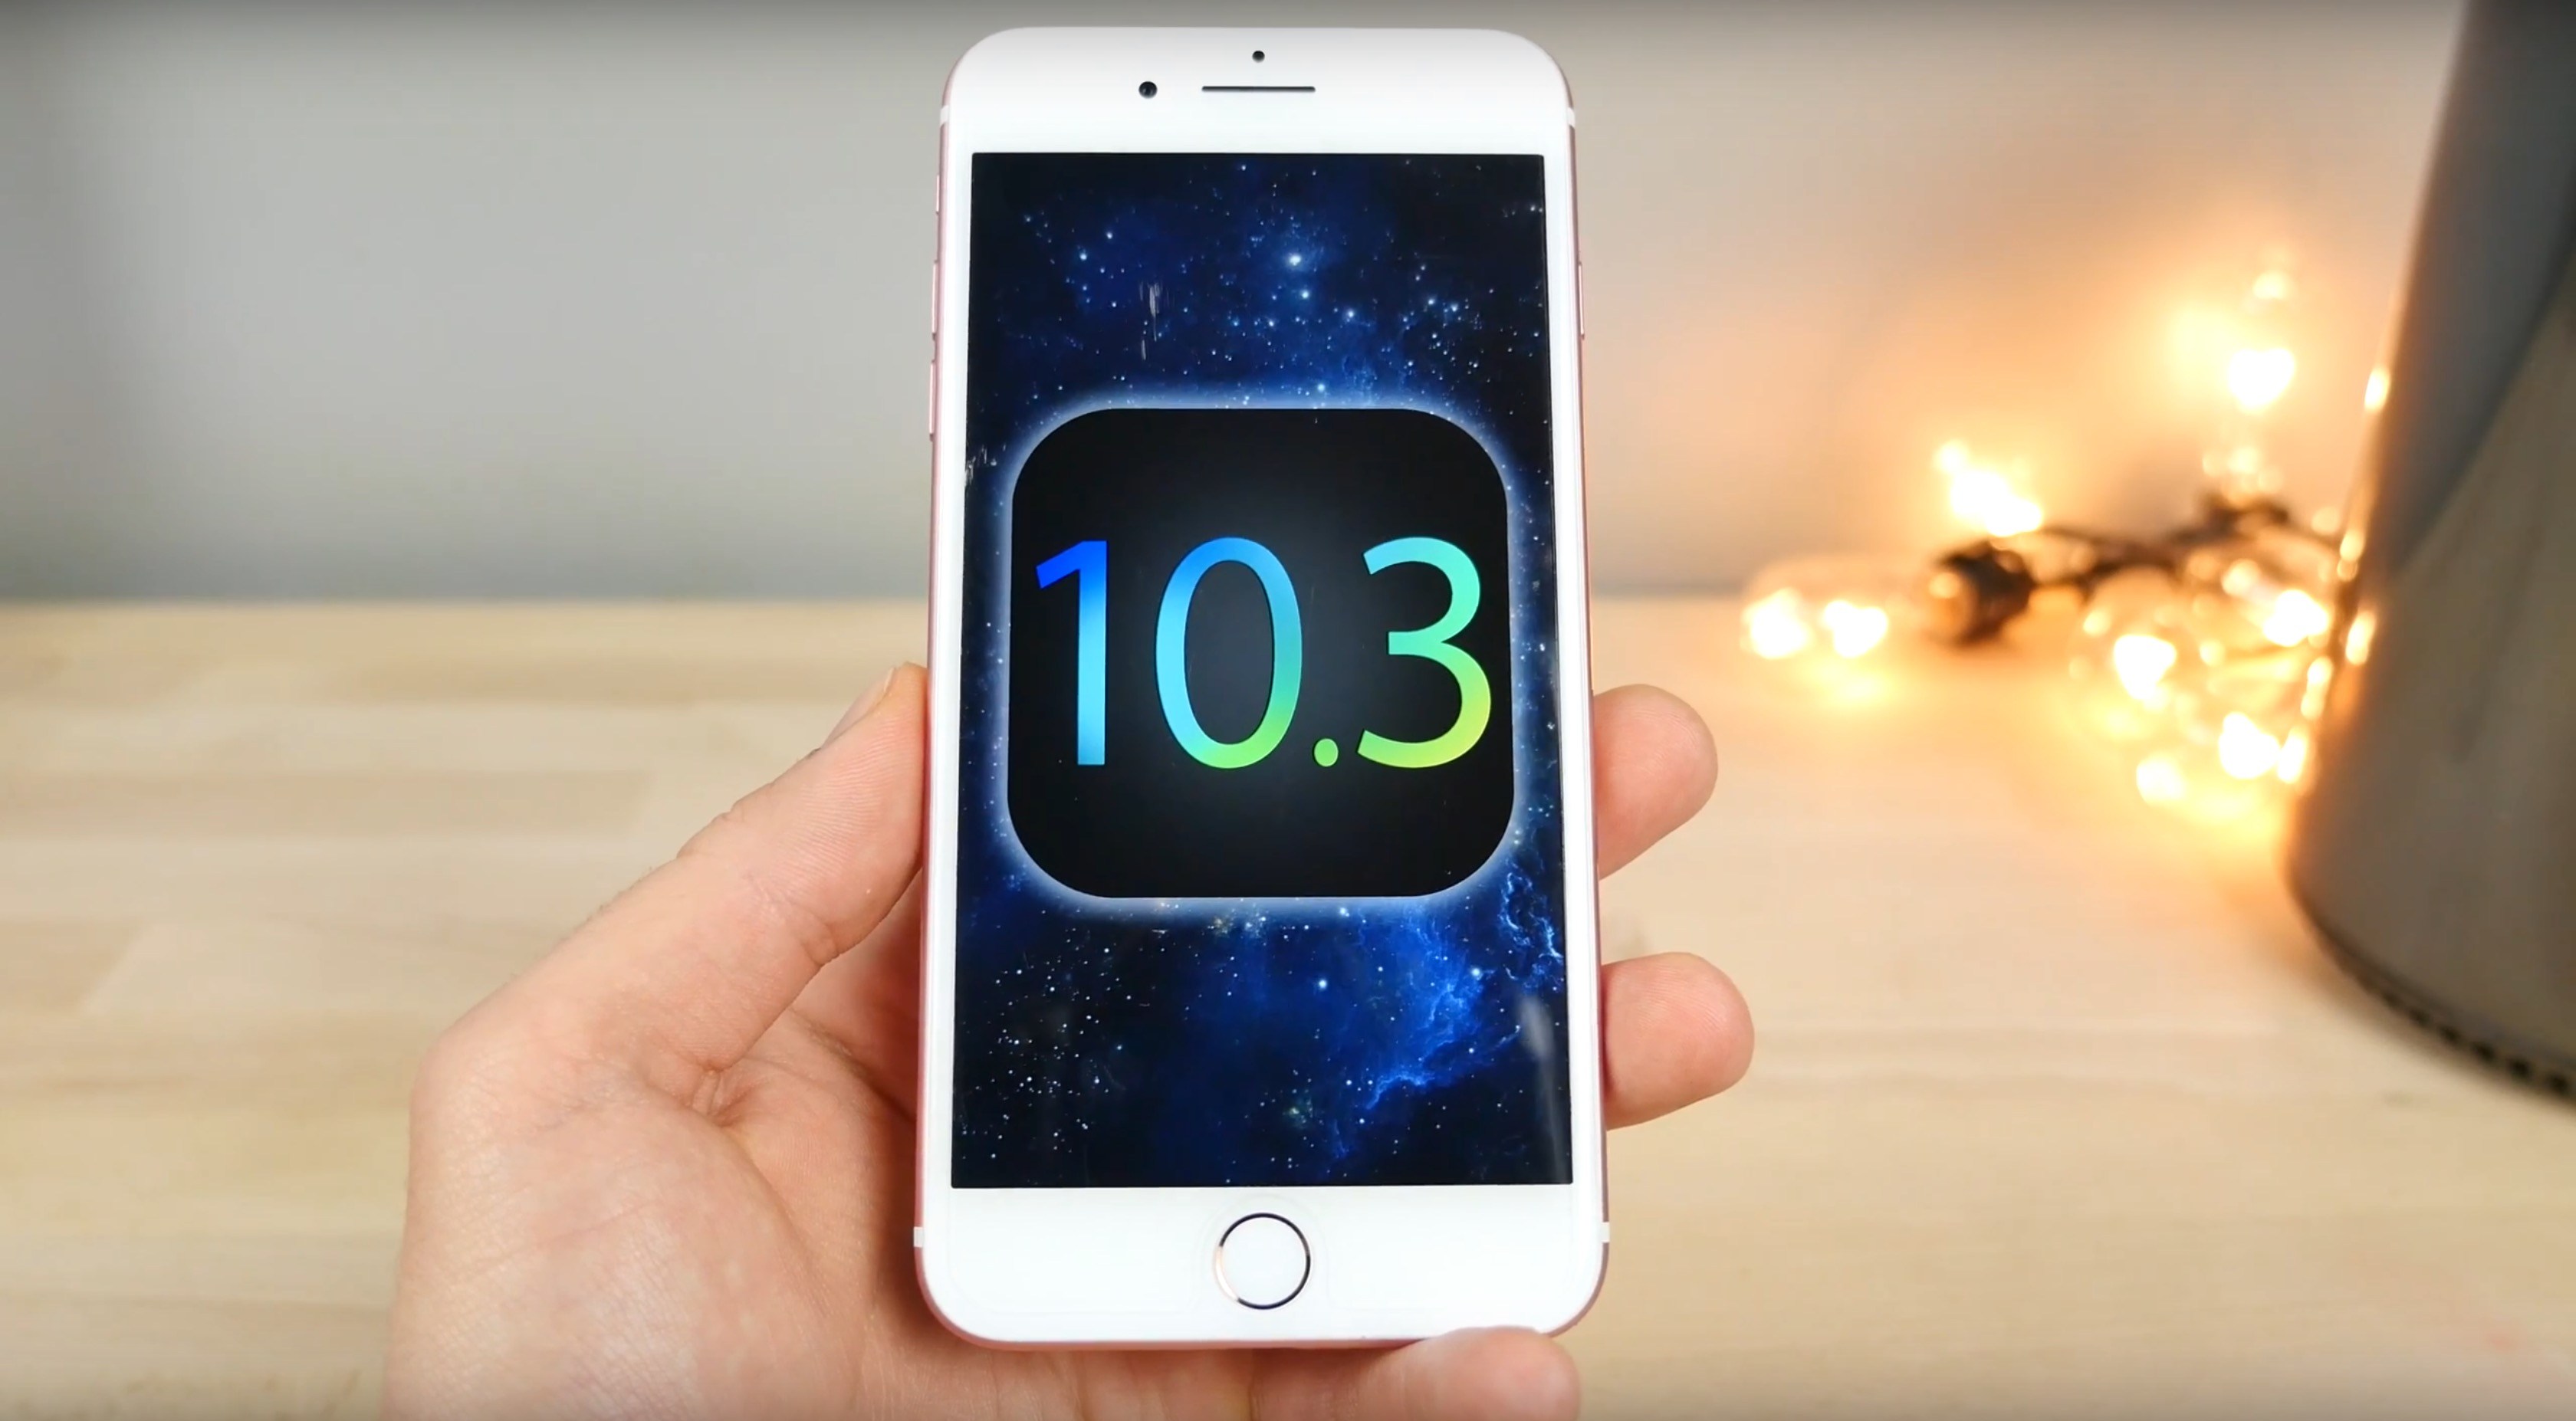 iOS 10.3 Beta 6 Released, Check Out The List Of Known Changes